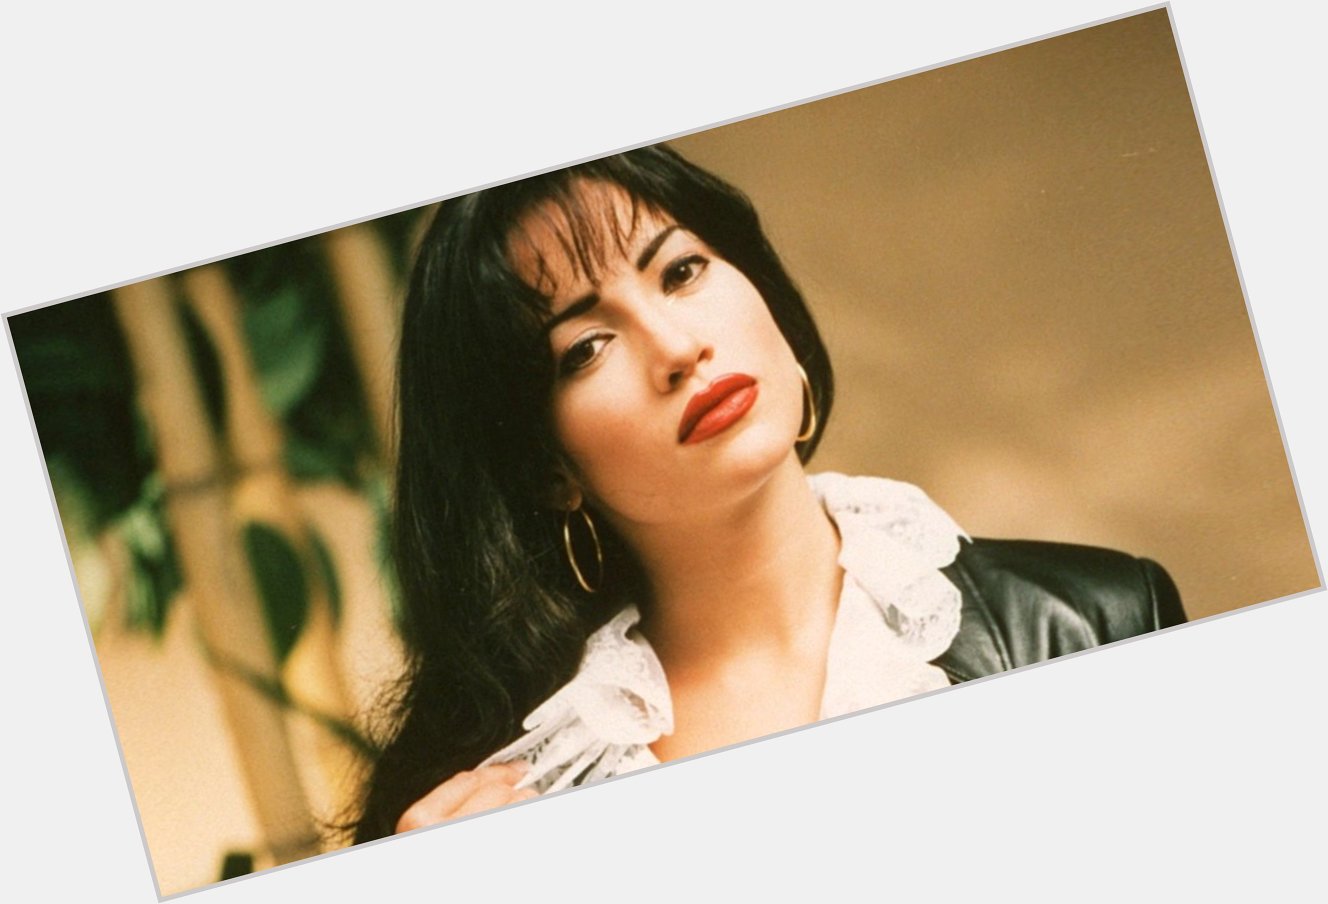 Happy Birthday to Selena Quintanilla! She would have turned 47 today.  